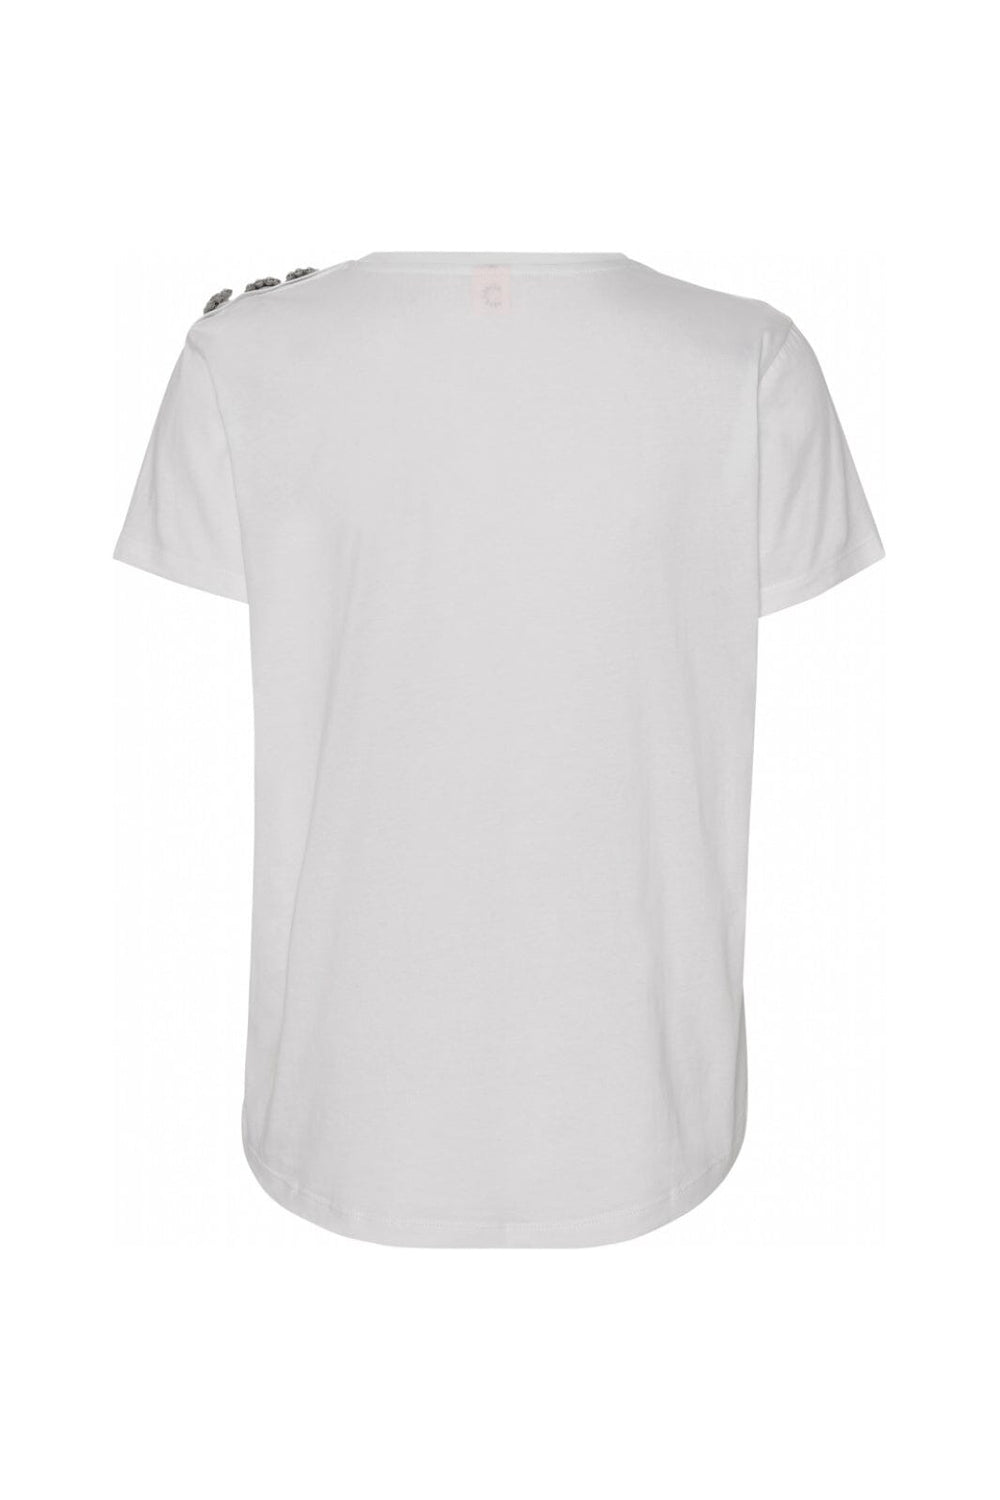 Custommade - Molly Crystal - 001 Bright White T-shirts 